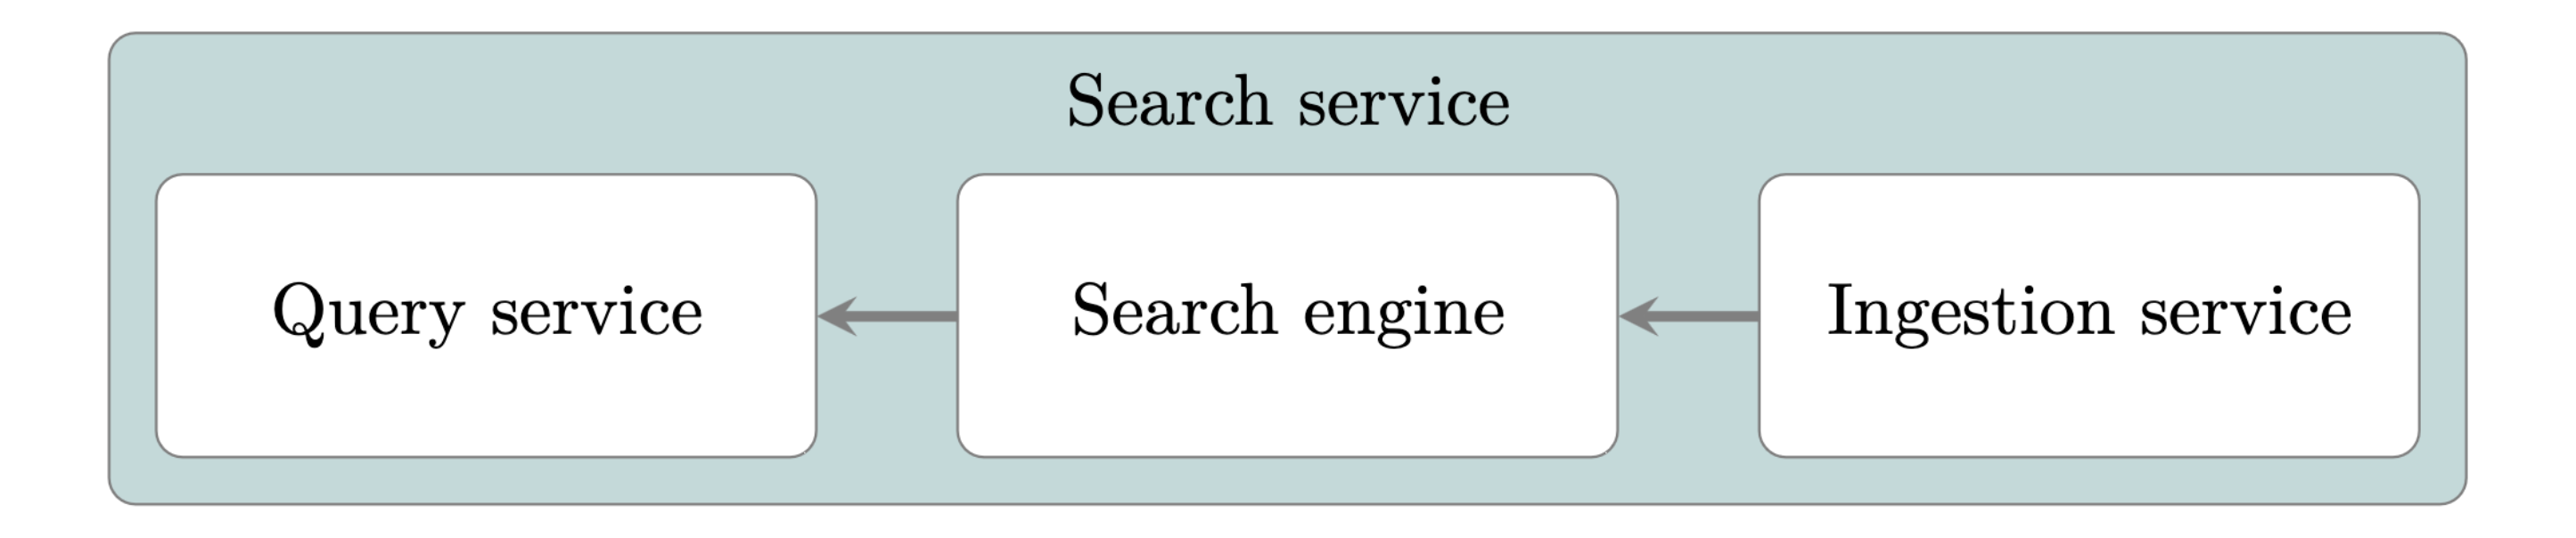 Search service and search engine grouping